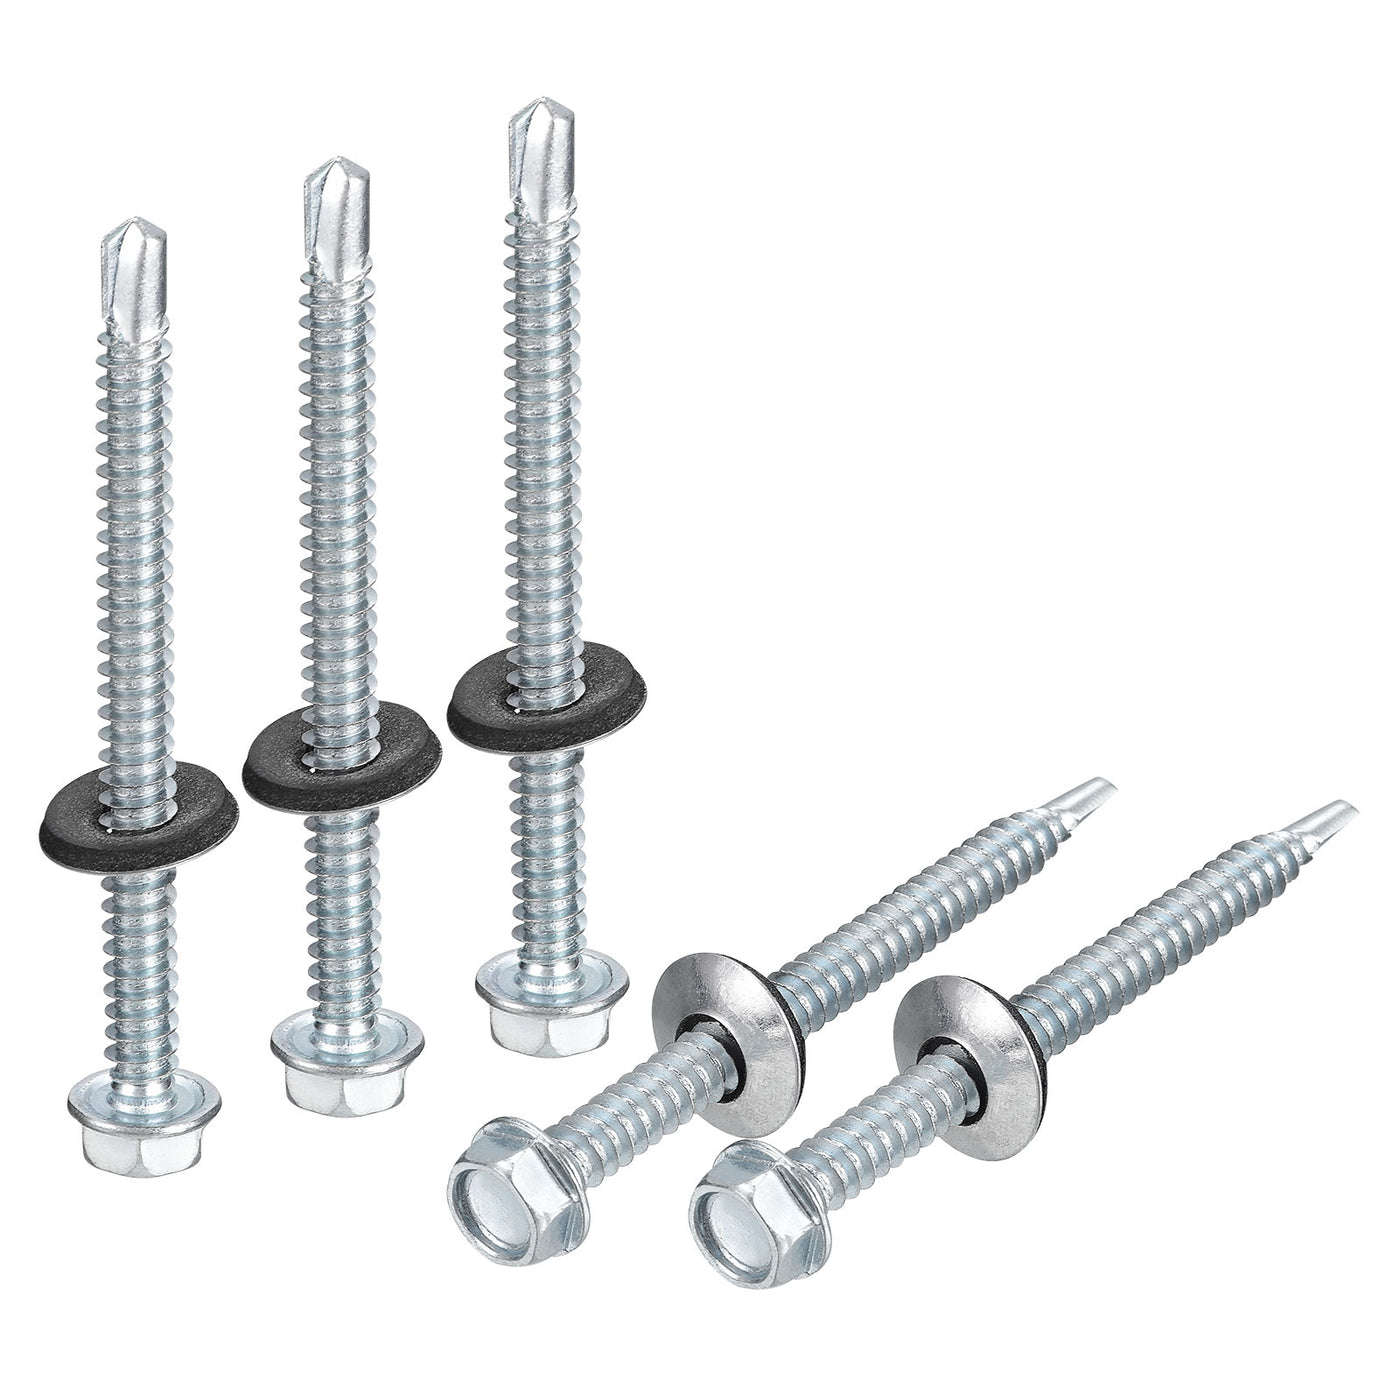 uxcell Uxcell #14 x 2-61/64" Self Drilling Screws, 25pcs Roofing Screws with EPDM Washer